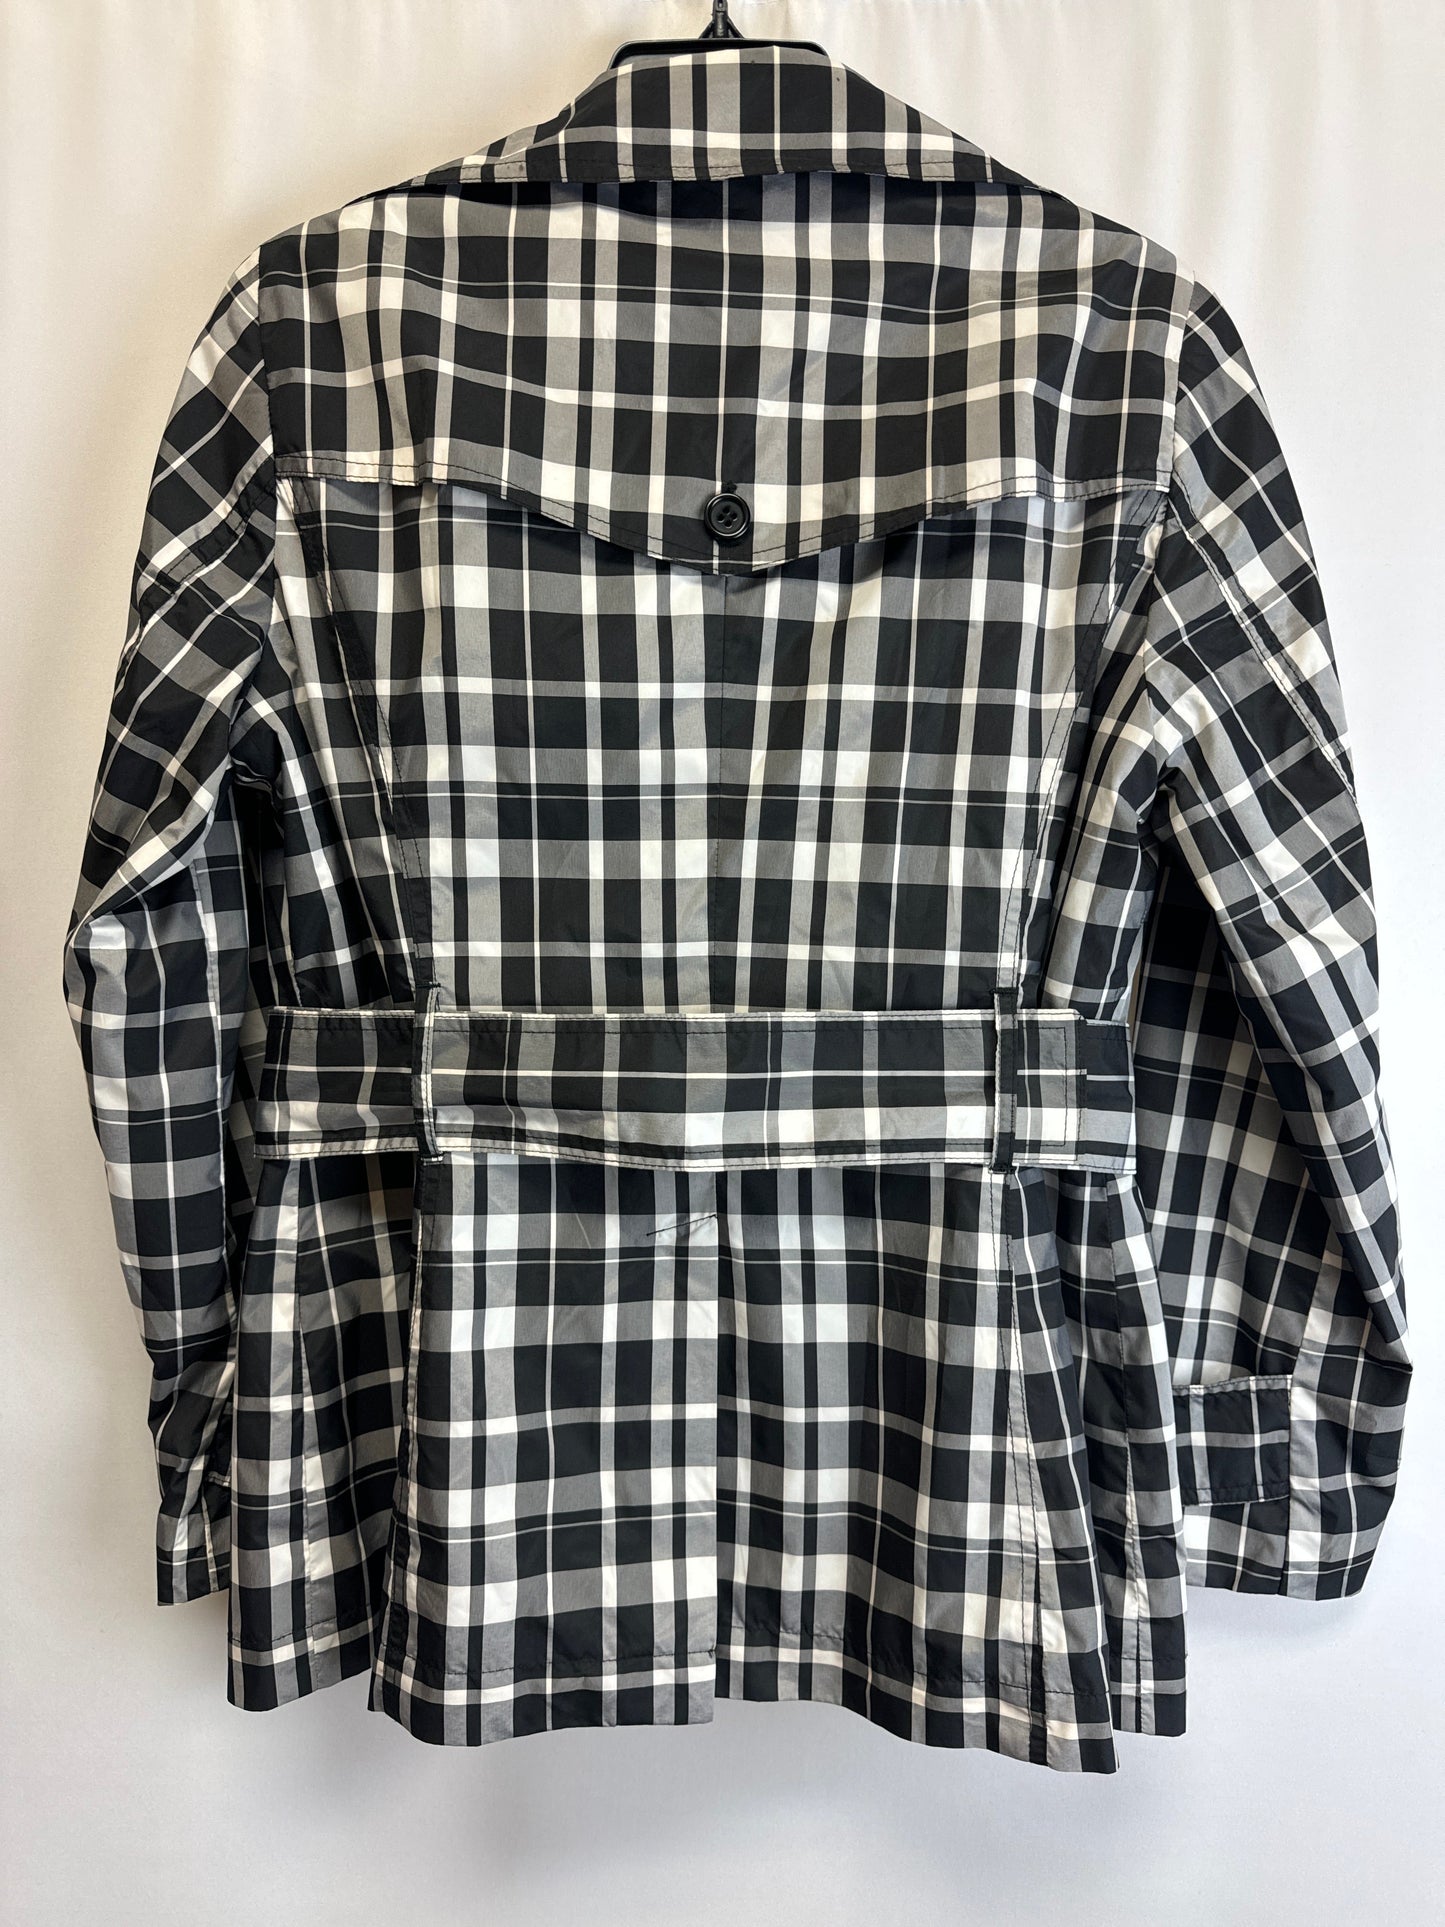 Coat Other By New York And Co  Size: M